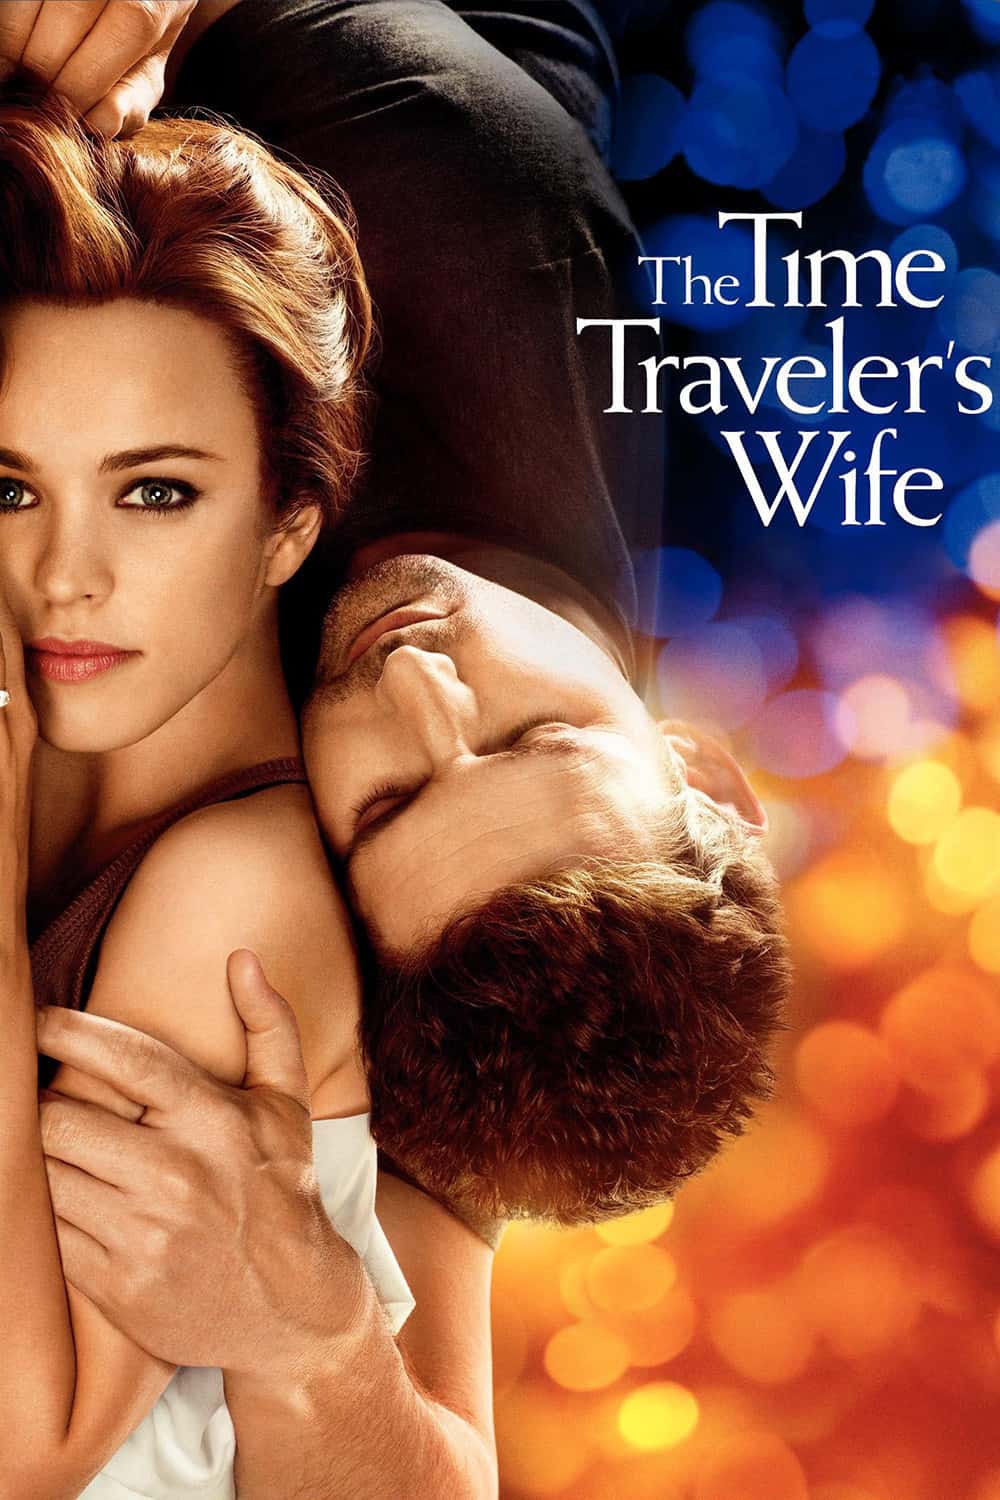 The Time Traveler's Wife Best Movies Like the Notebook